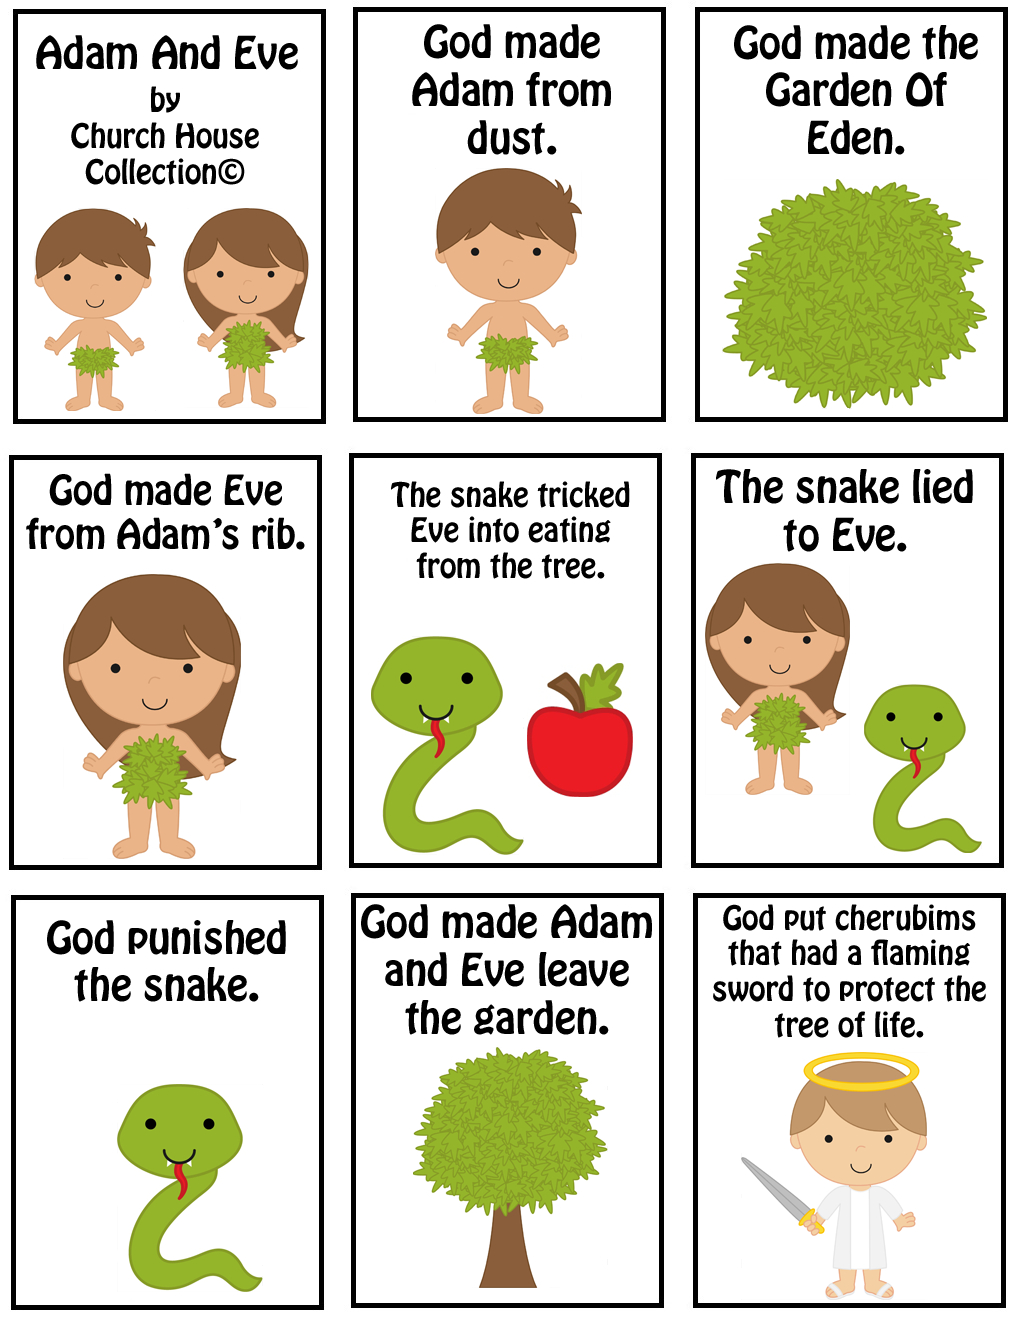 Free Adam And Eve Mini Booklet Printable For Kids In Sunday School - Free Printable Children&amp;amp;#039;s Church Curriculum